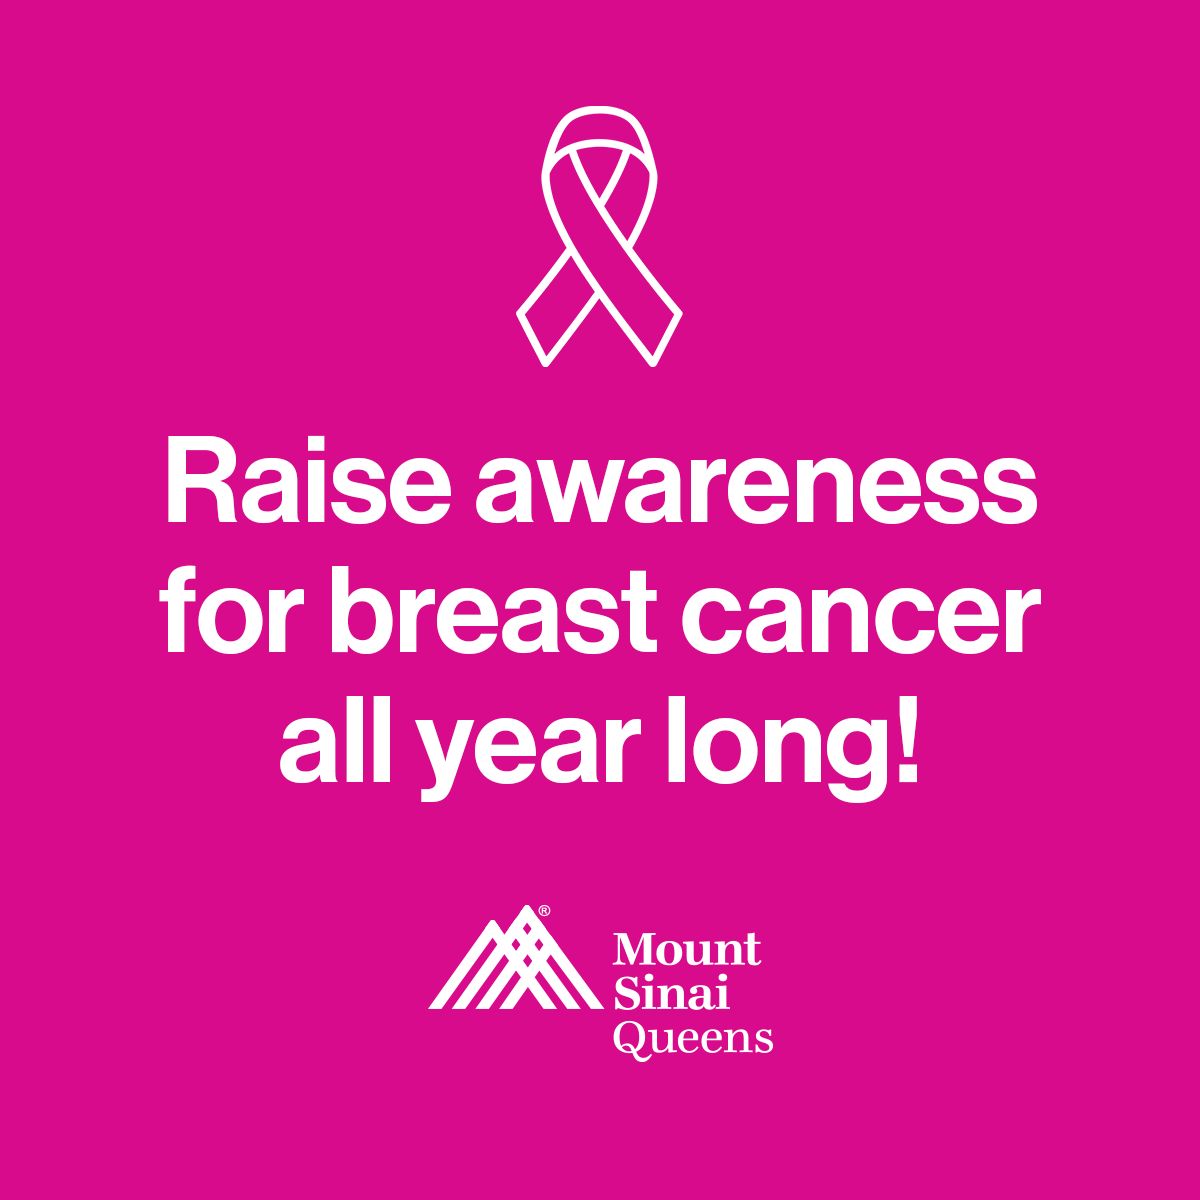 Even though October is ending, it doesn't mean we should stop raising awareness for #BreastCancer bit.ly/3m8rhAV